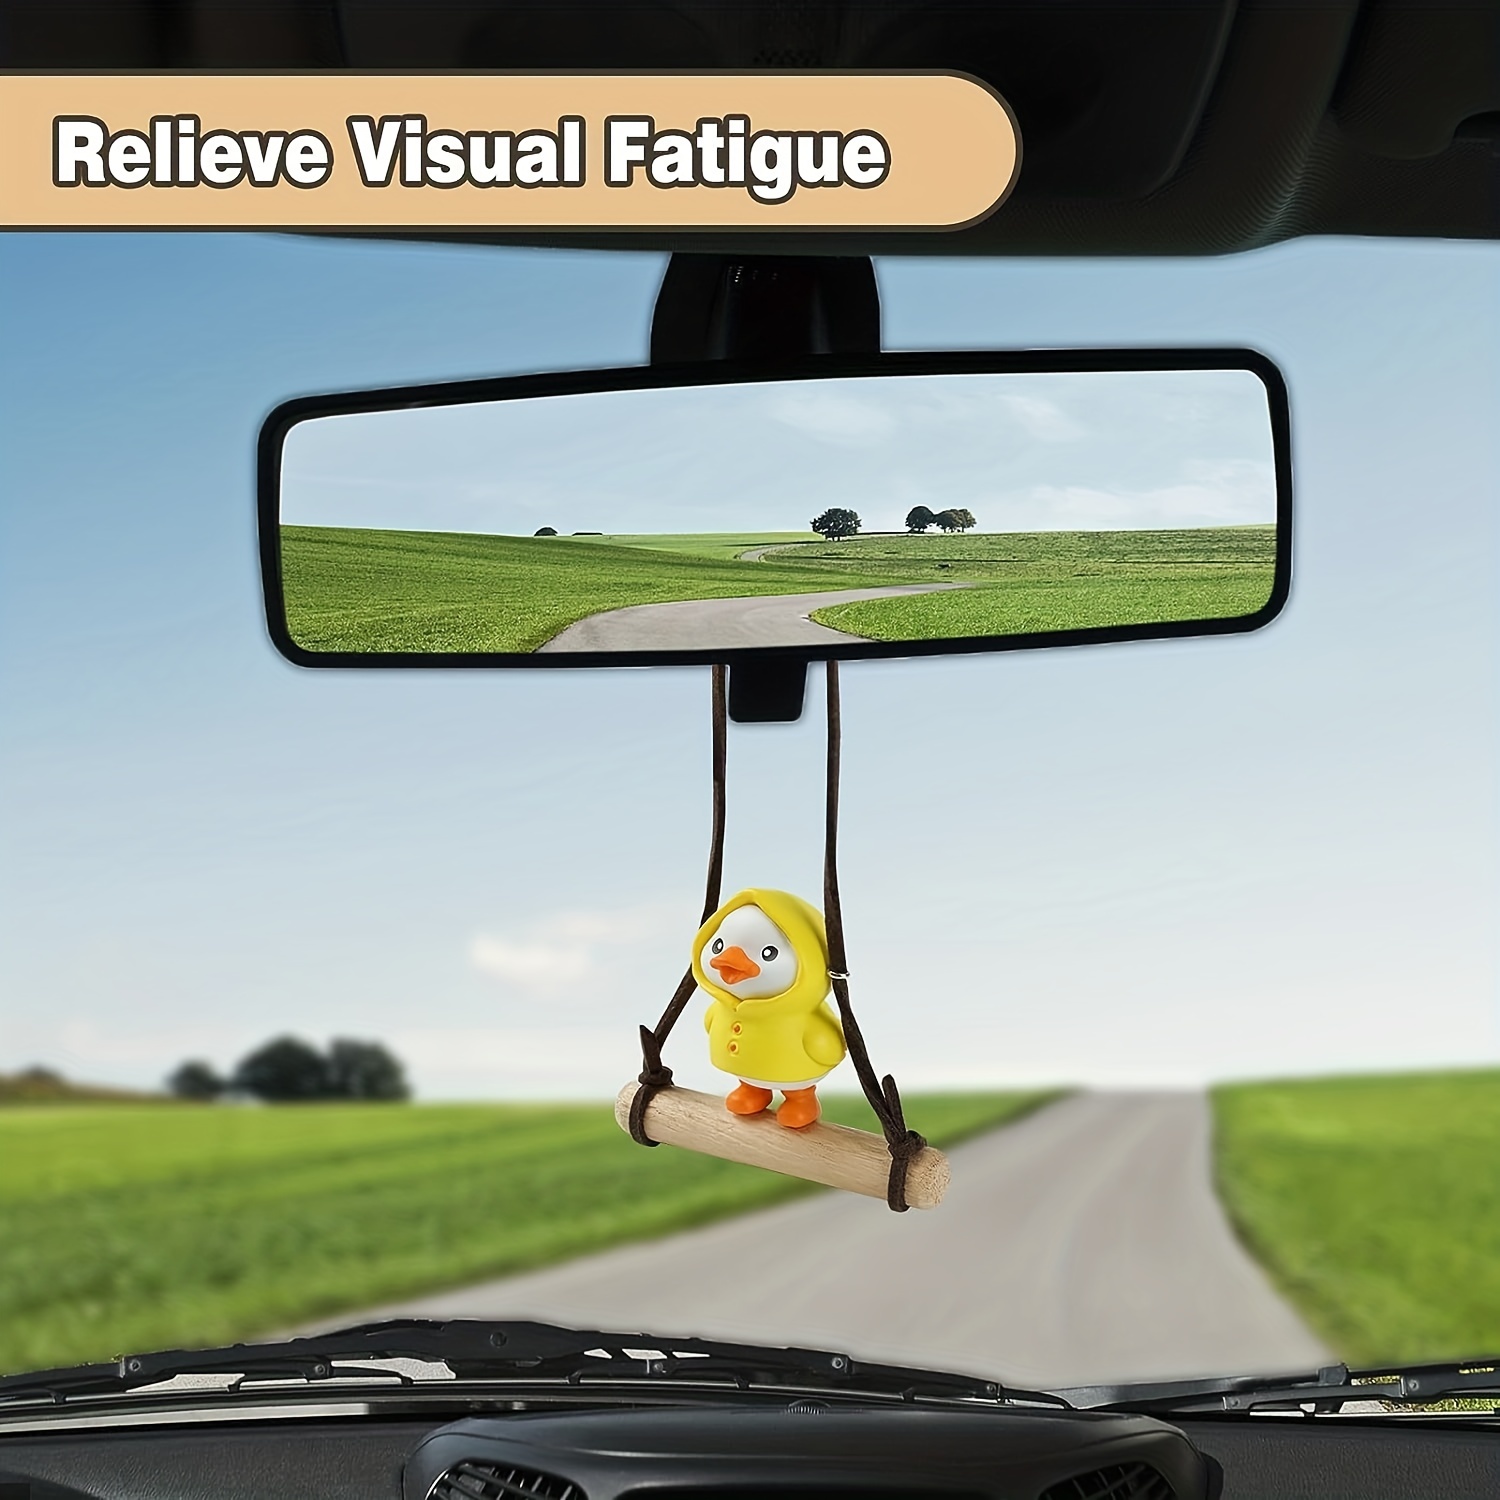 8,946 Rearview Mirror Images, Stock Photos, 3D objects, & Vectors